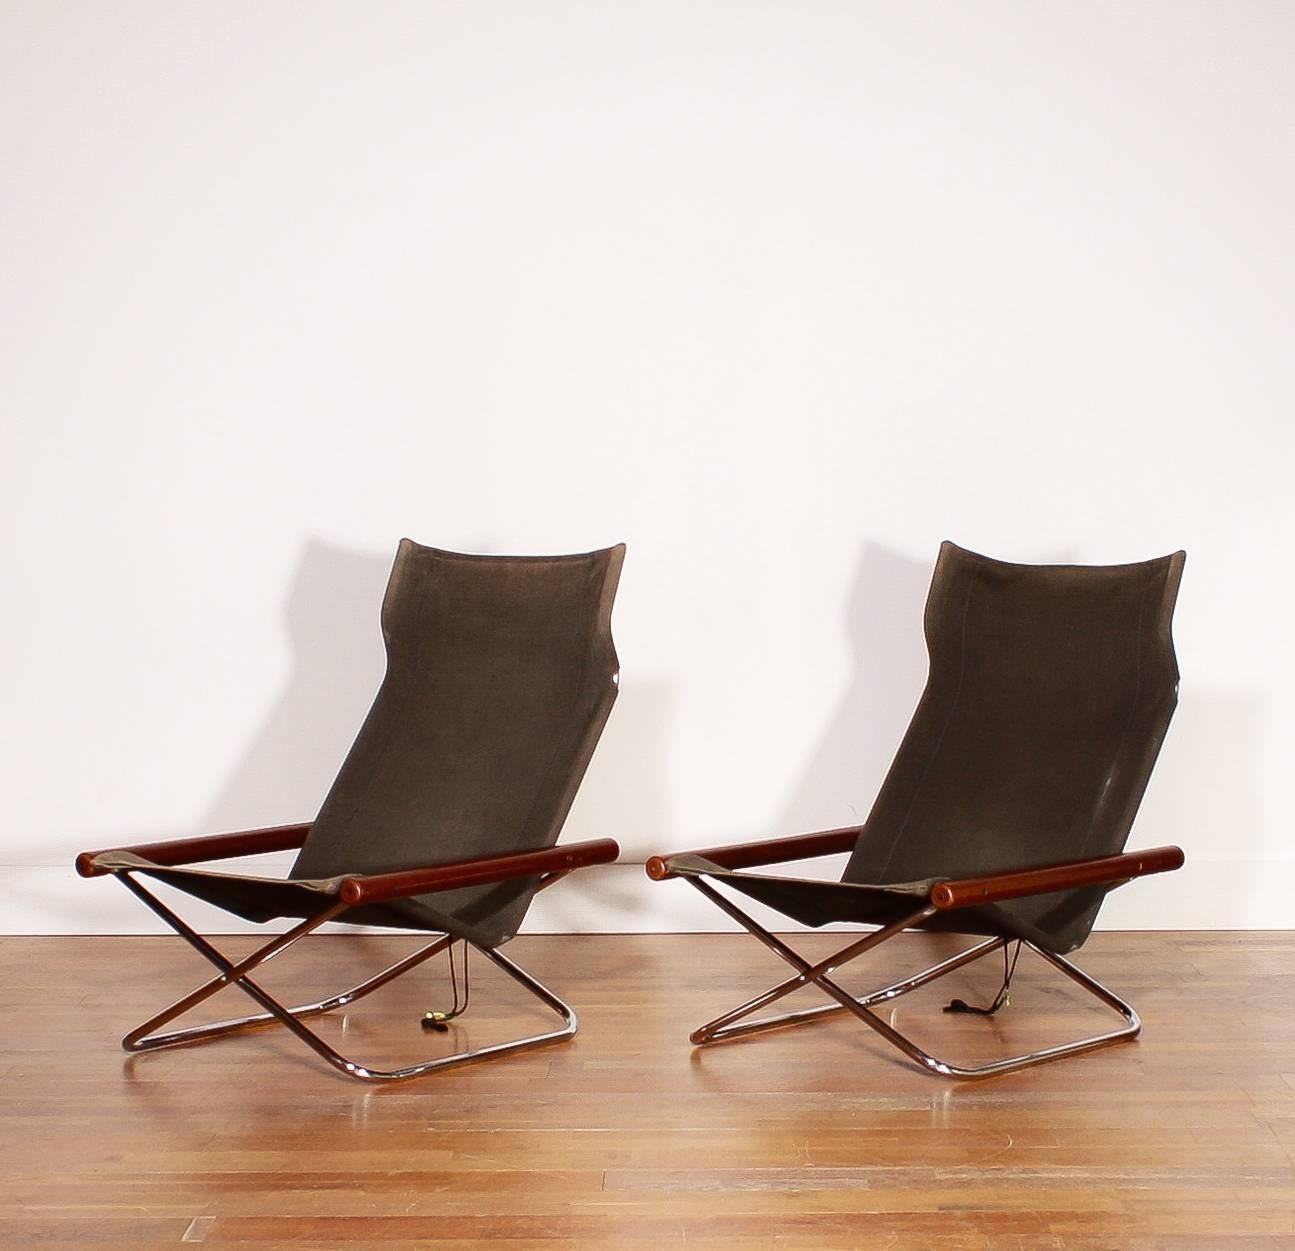 Beautiful minimal NY chairs with mahogany armrests.

Designed by Takeshi Nii.

Manufactured by Suekichi Uchida in Japan.

Period 1960.

The condition is very good; Upholstery has little fading.

Price per set.

The dimensions are: H. 82